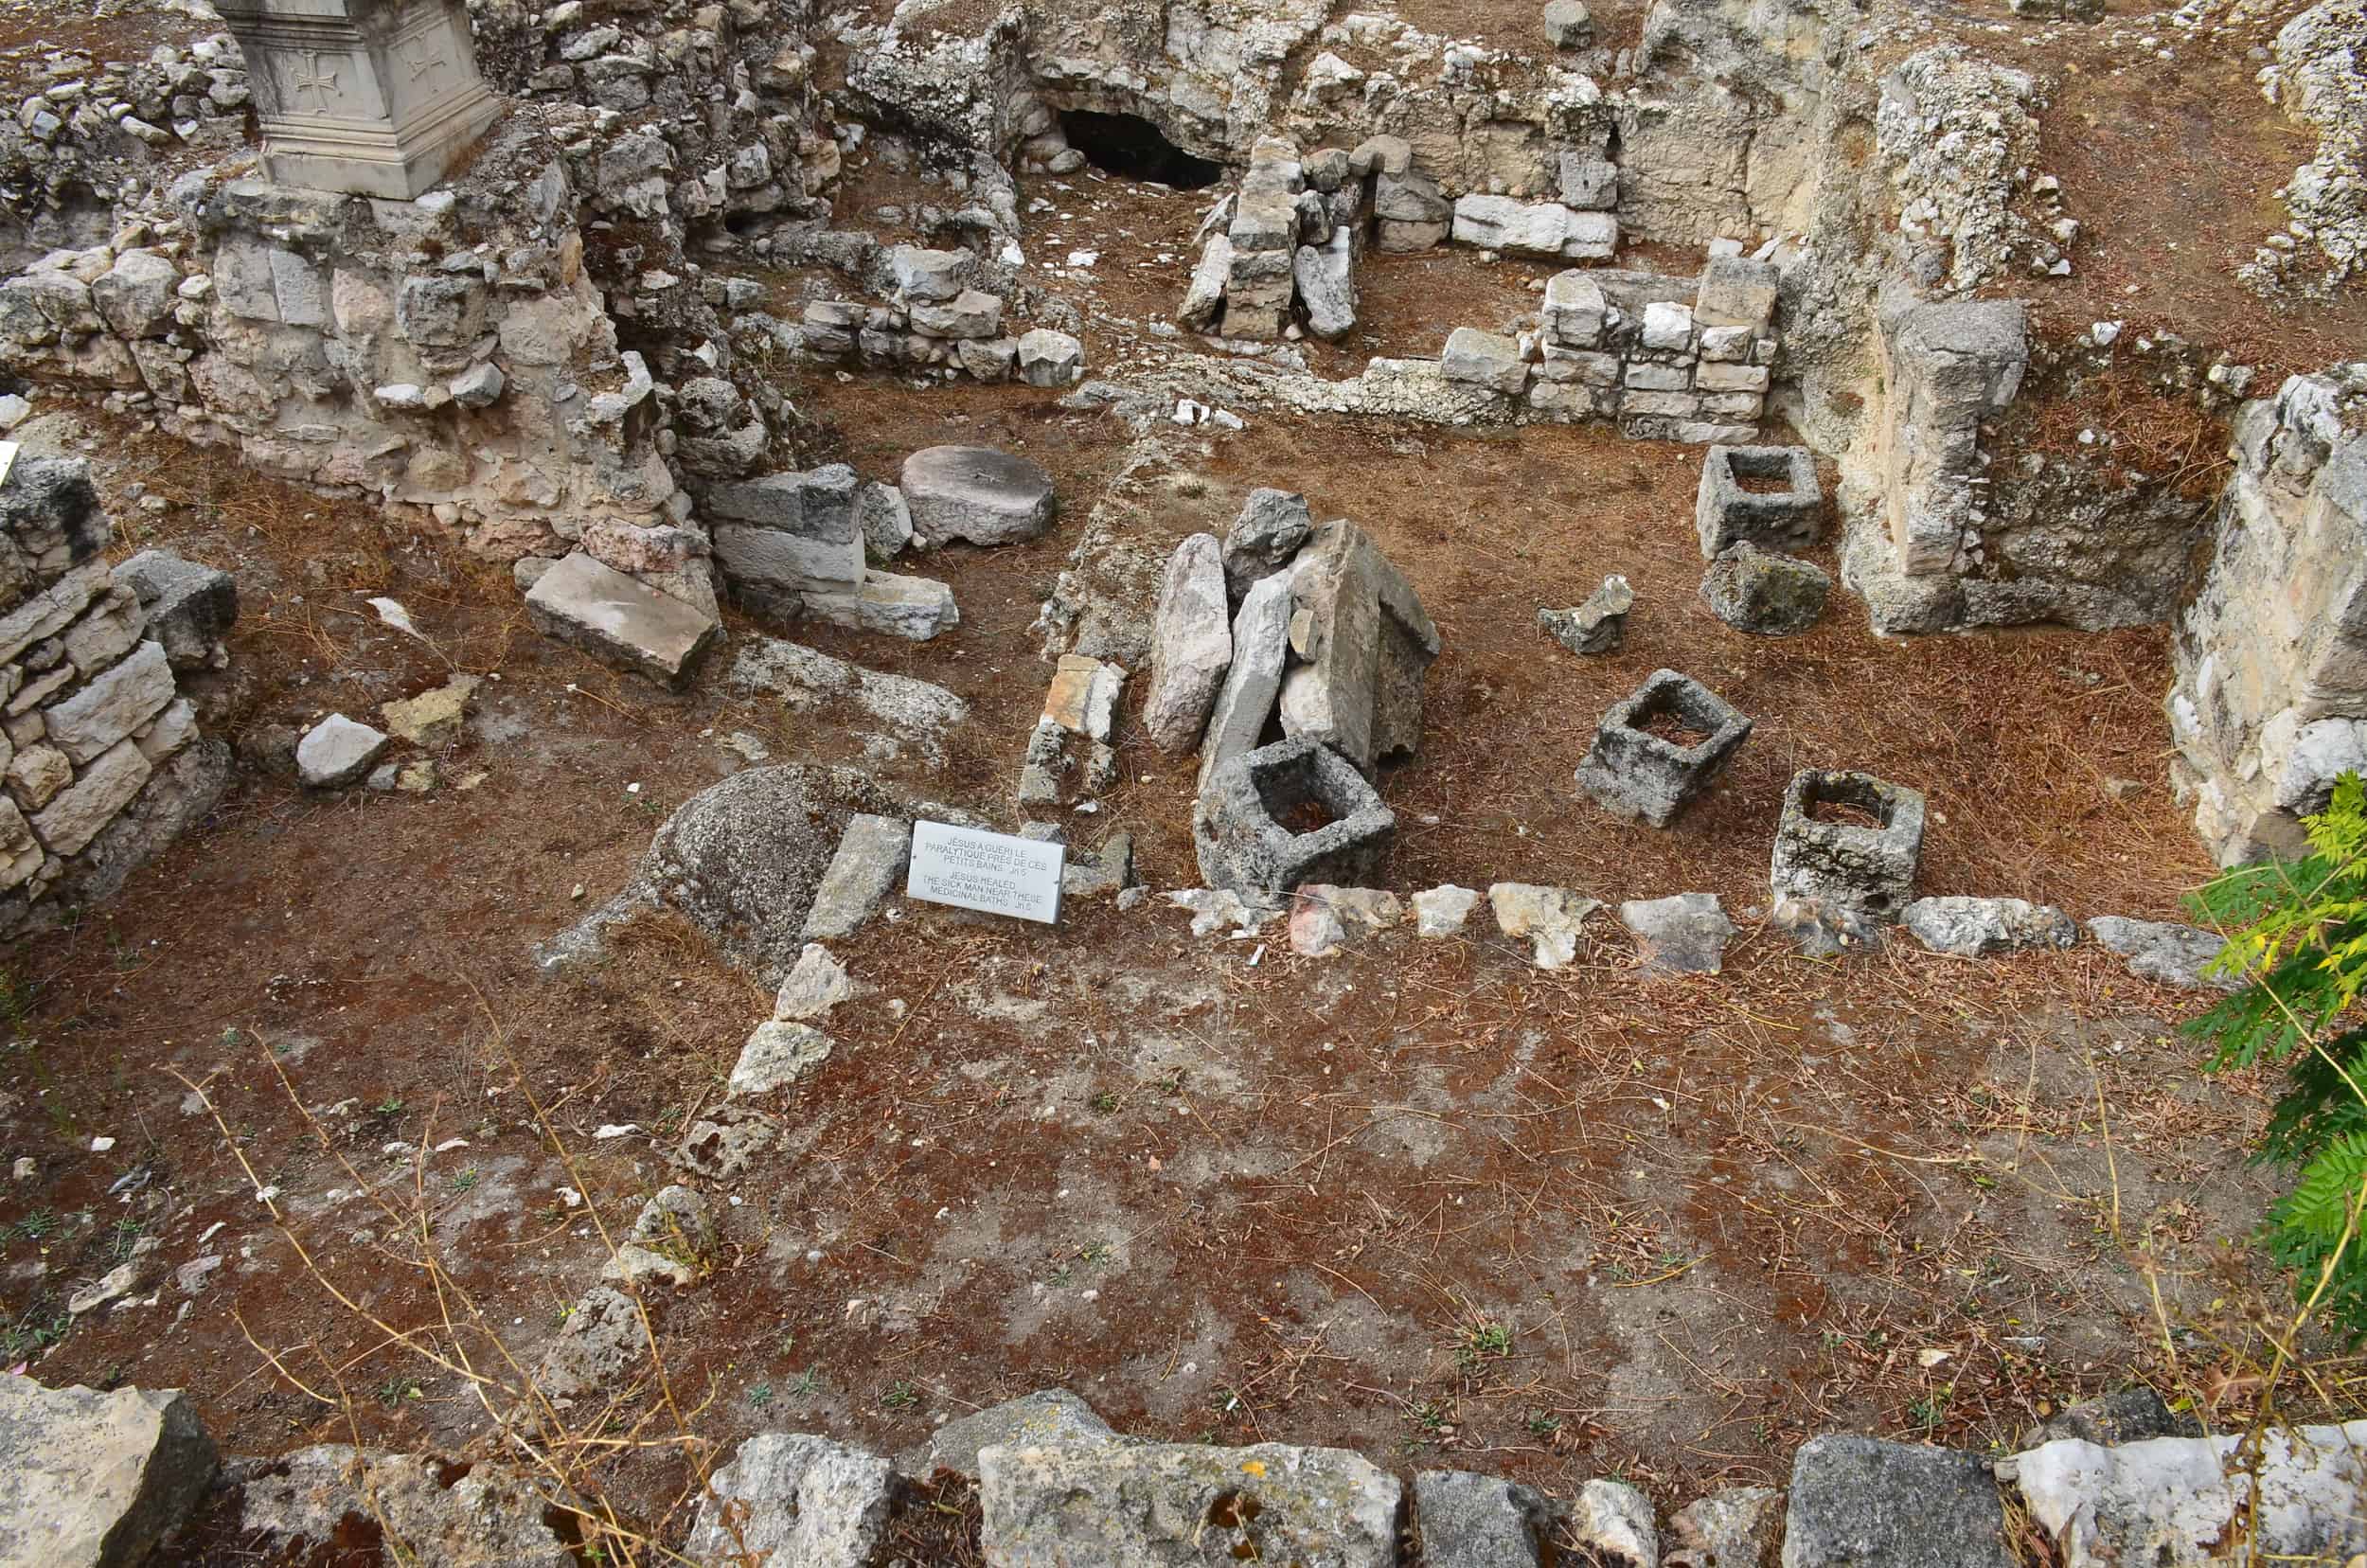 Roman dwellings at the Pools of Bethesda